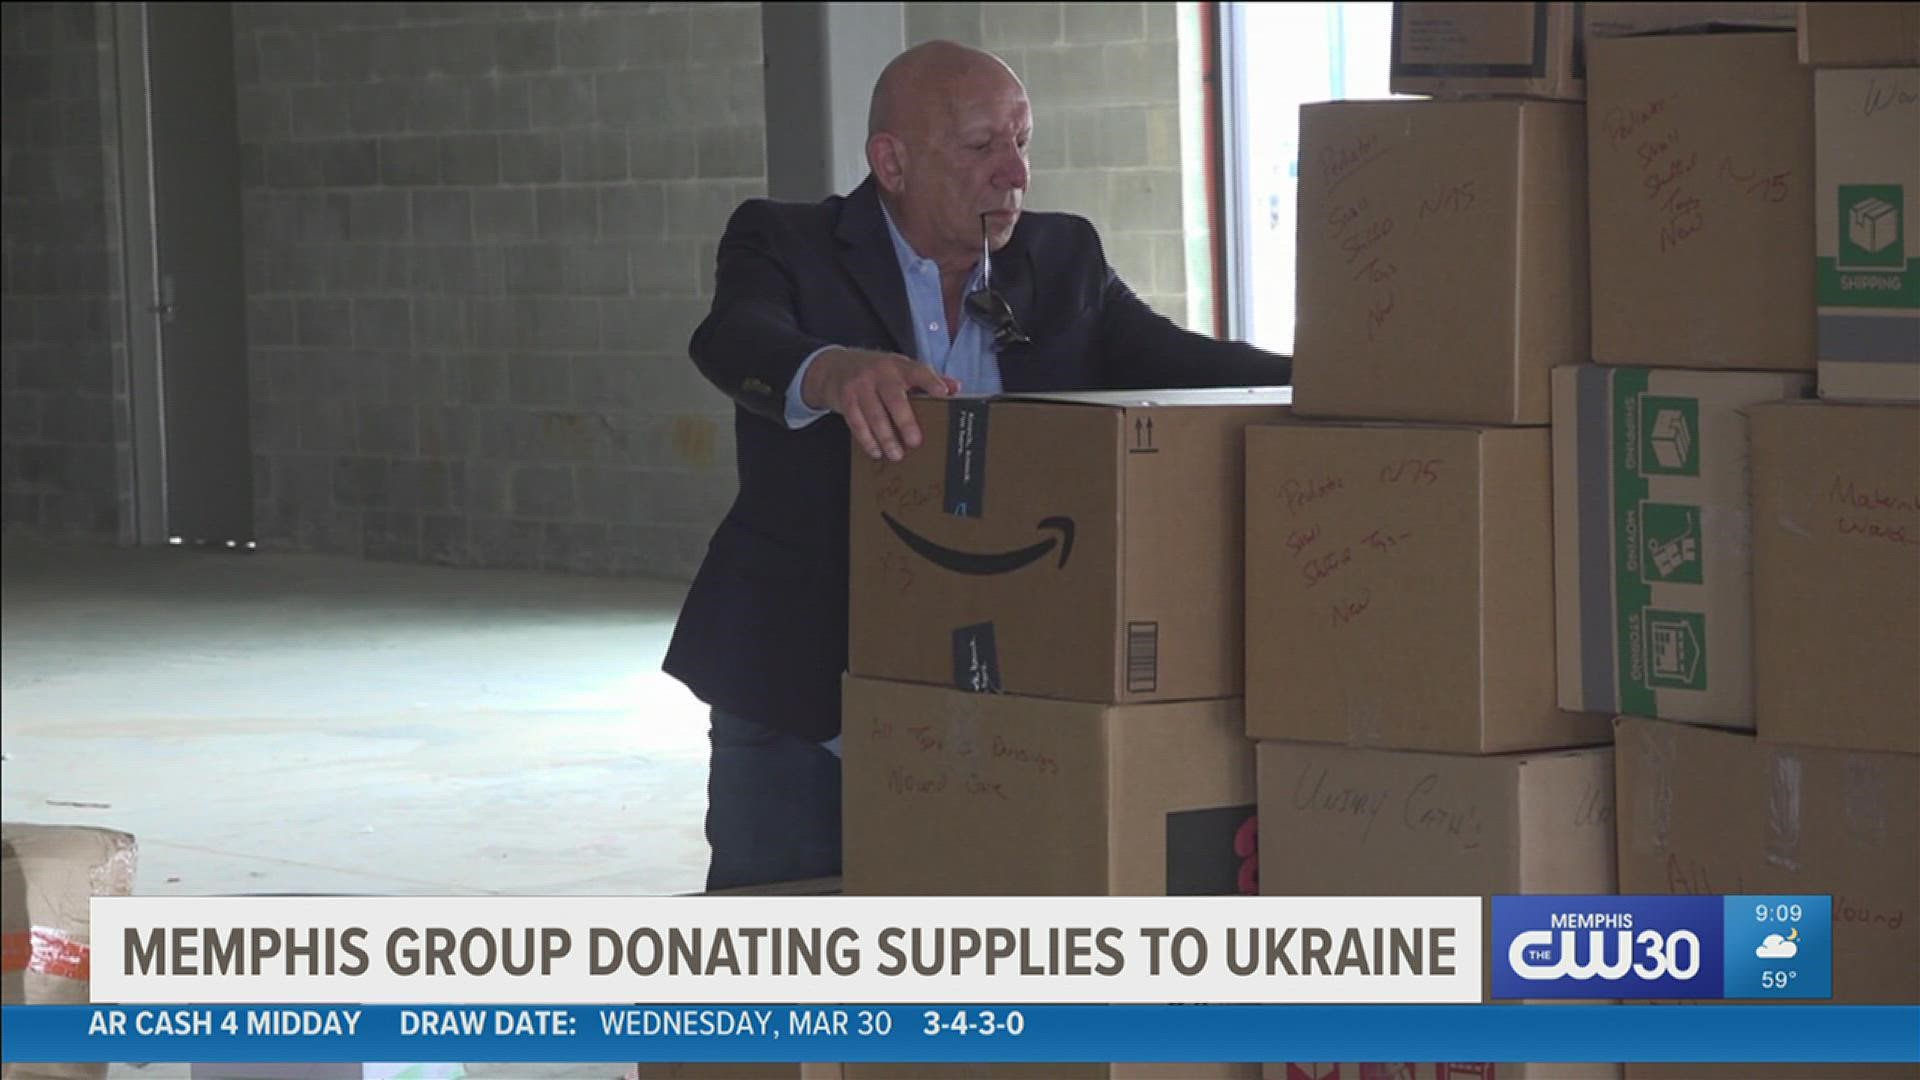 901 Stands with Ukraine has collected more than five tons of supplies.